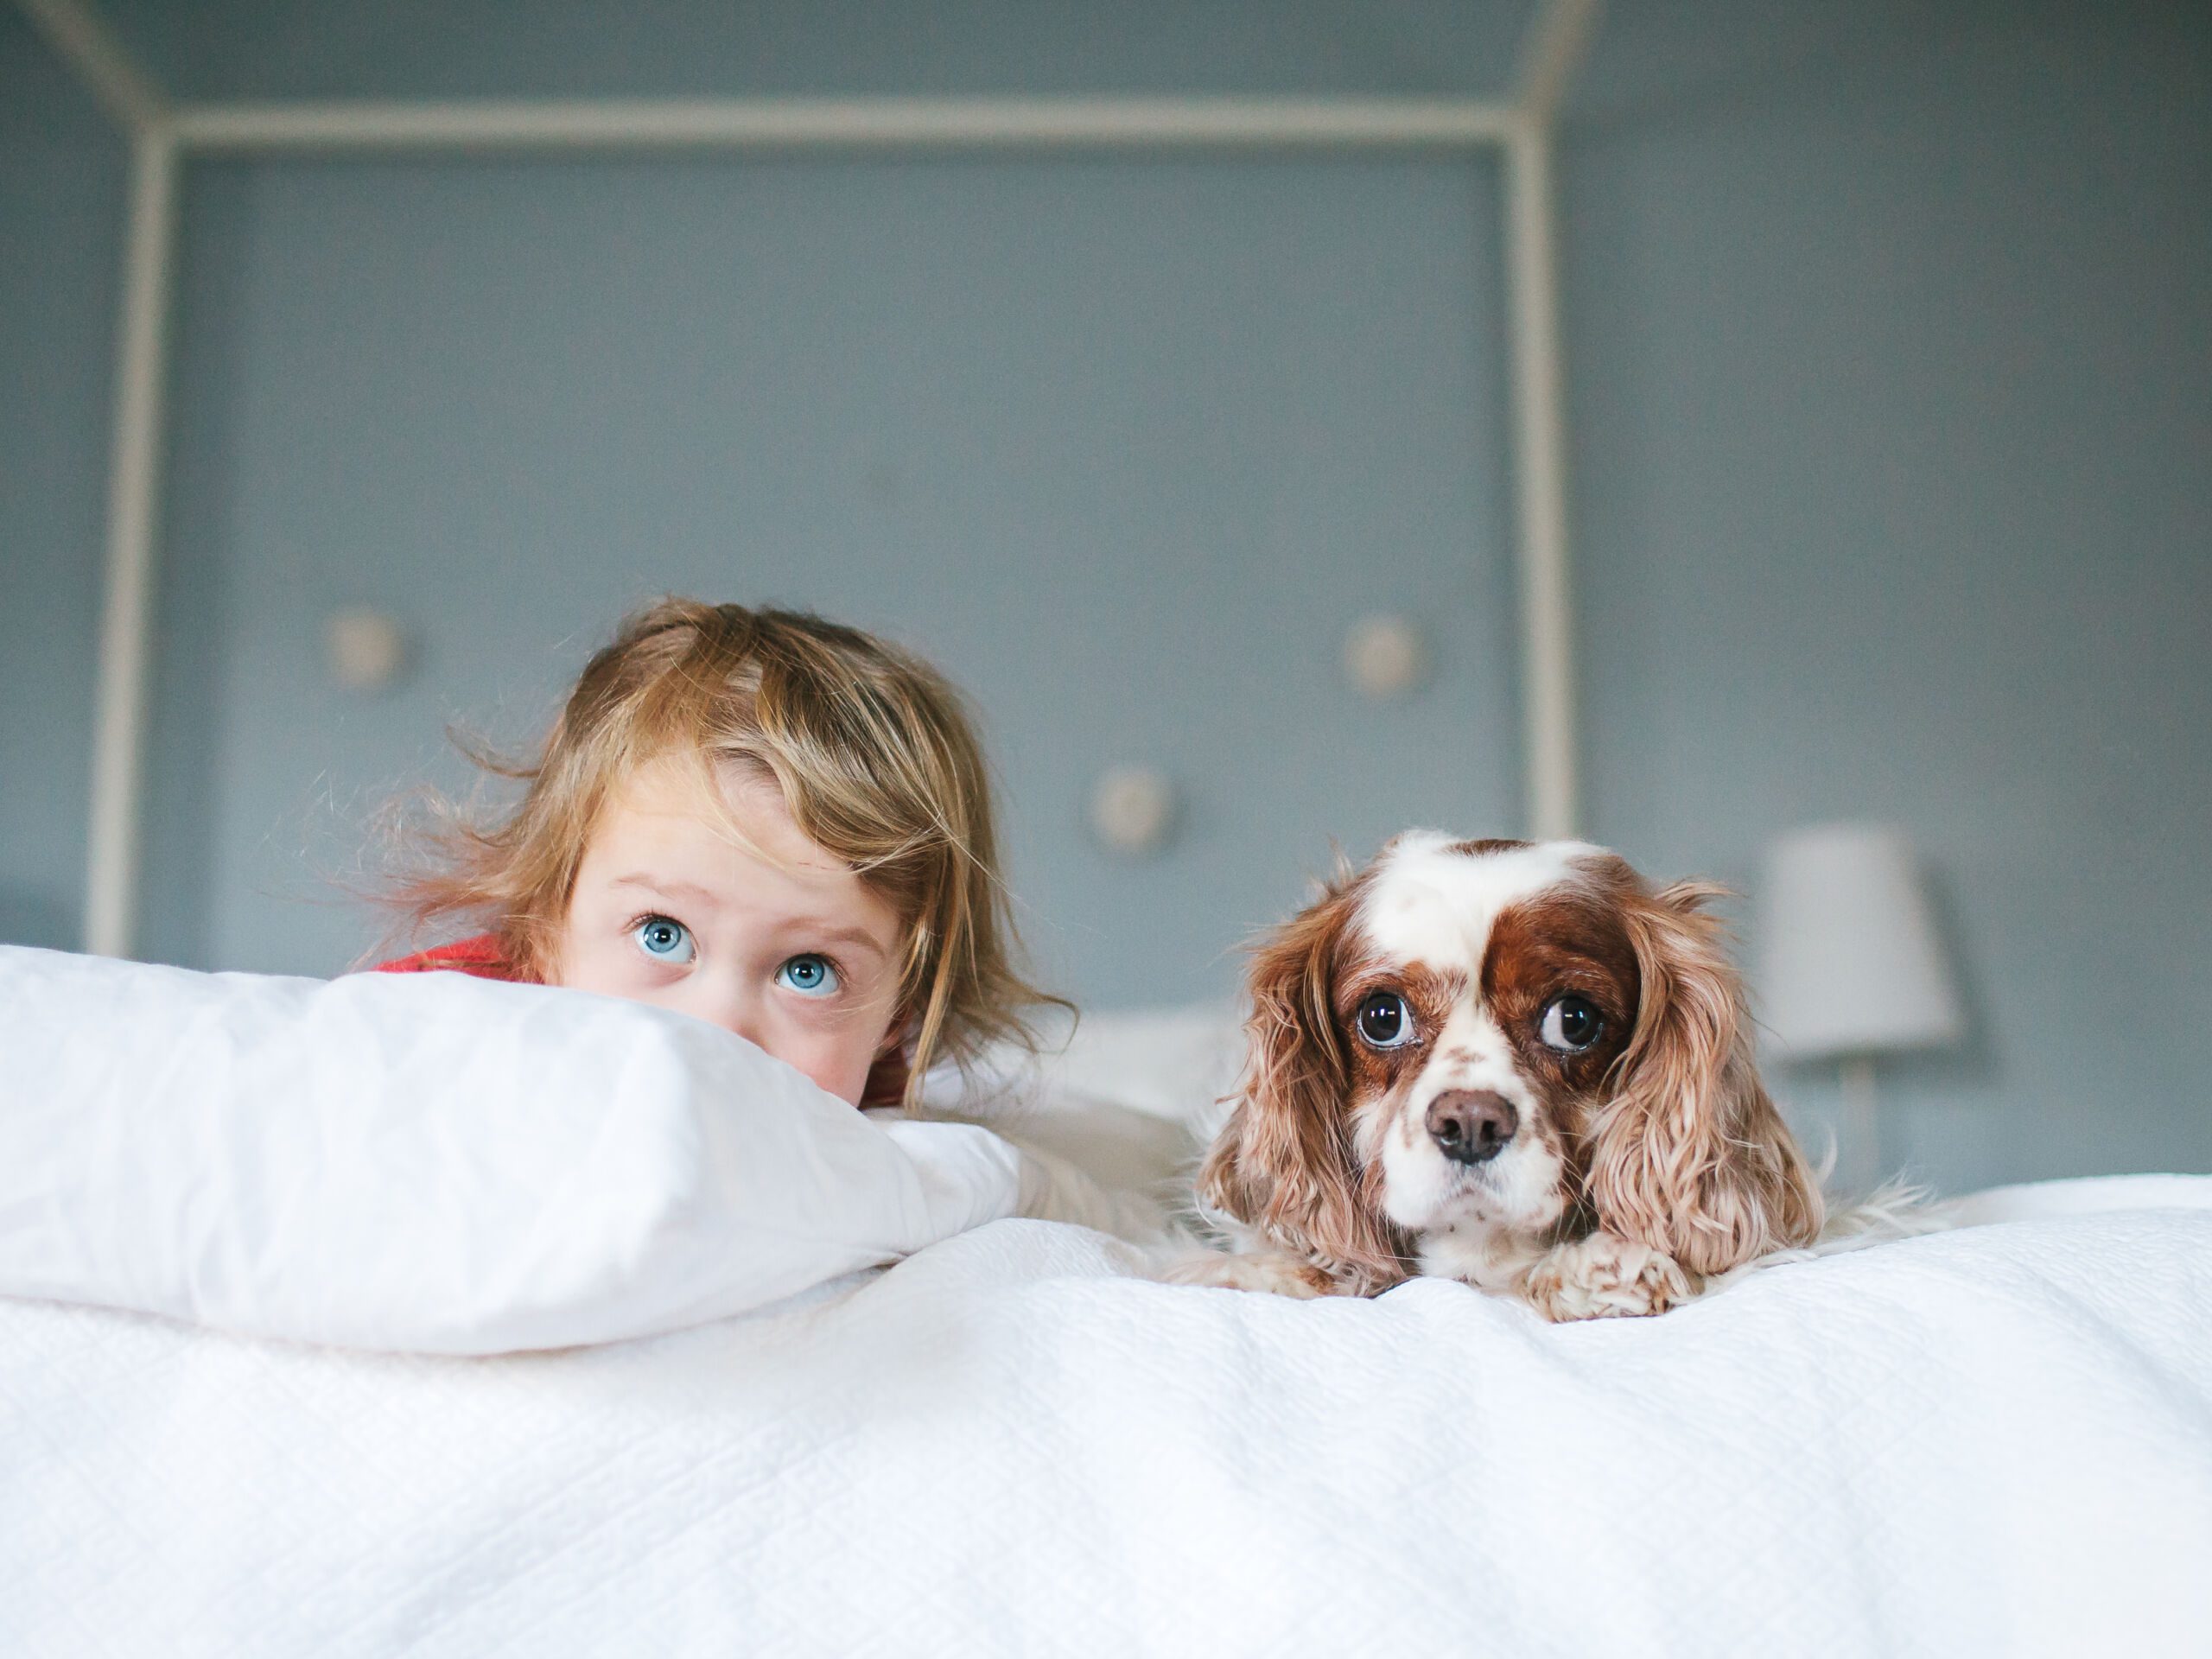 A Child And Her Dog Peeking Out From The Bed